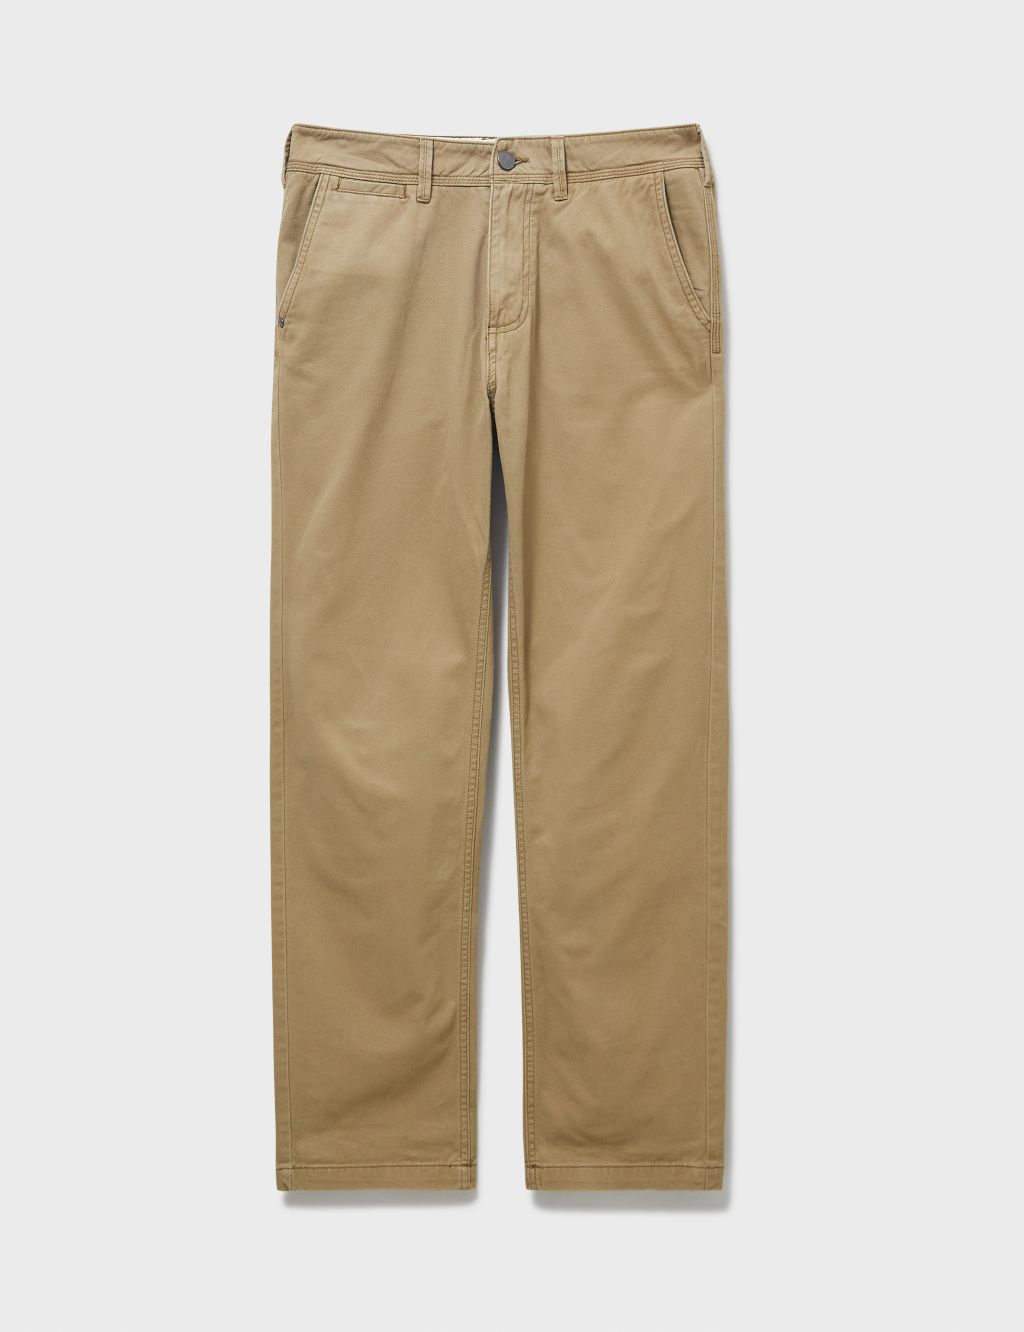 Straight Fit Pure Cotton Chinos image 2